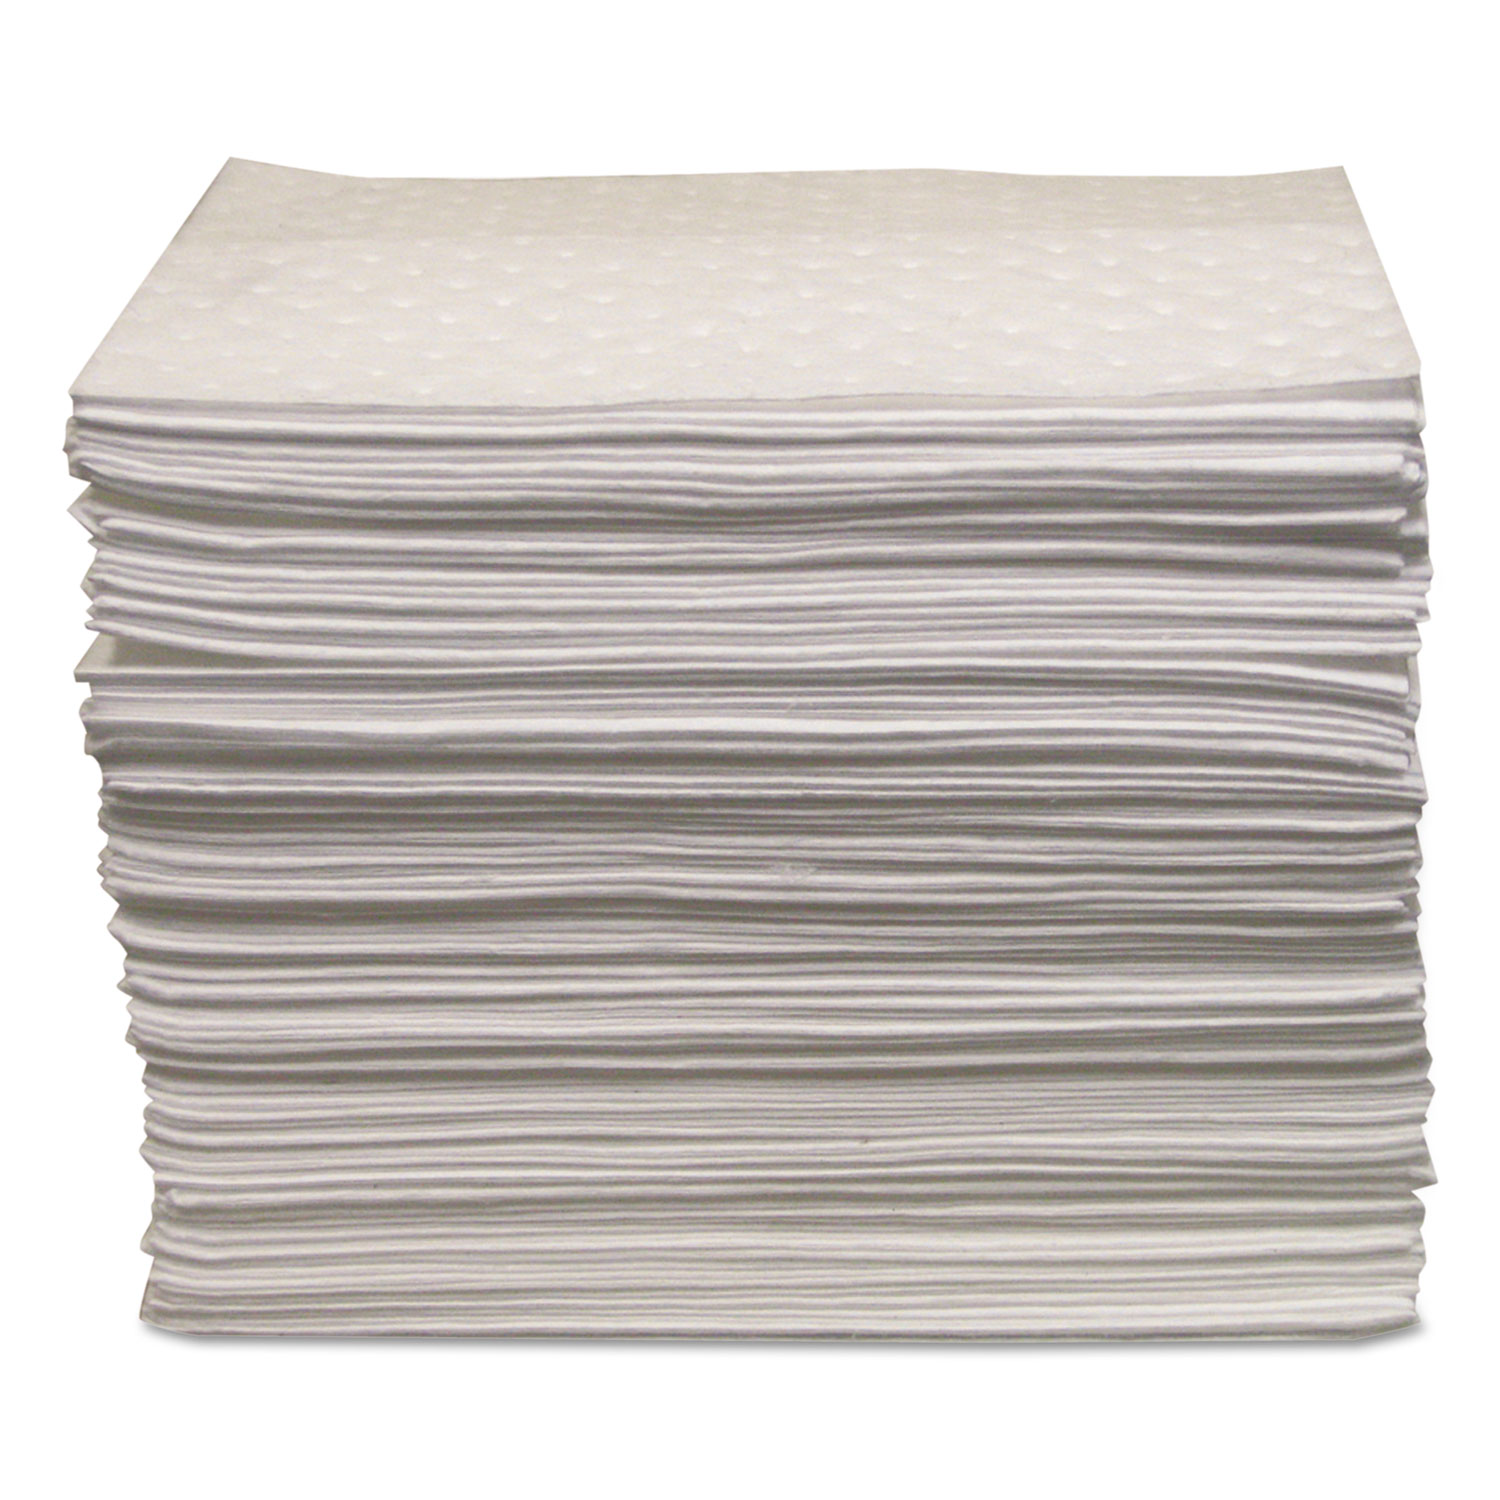 Oil Only Sorbent Pad 15x17, Heavy-Weight